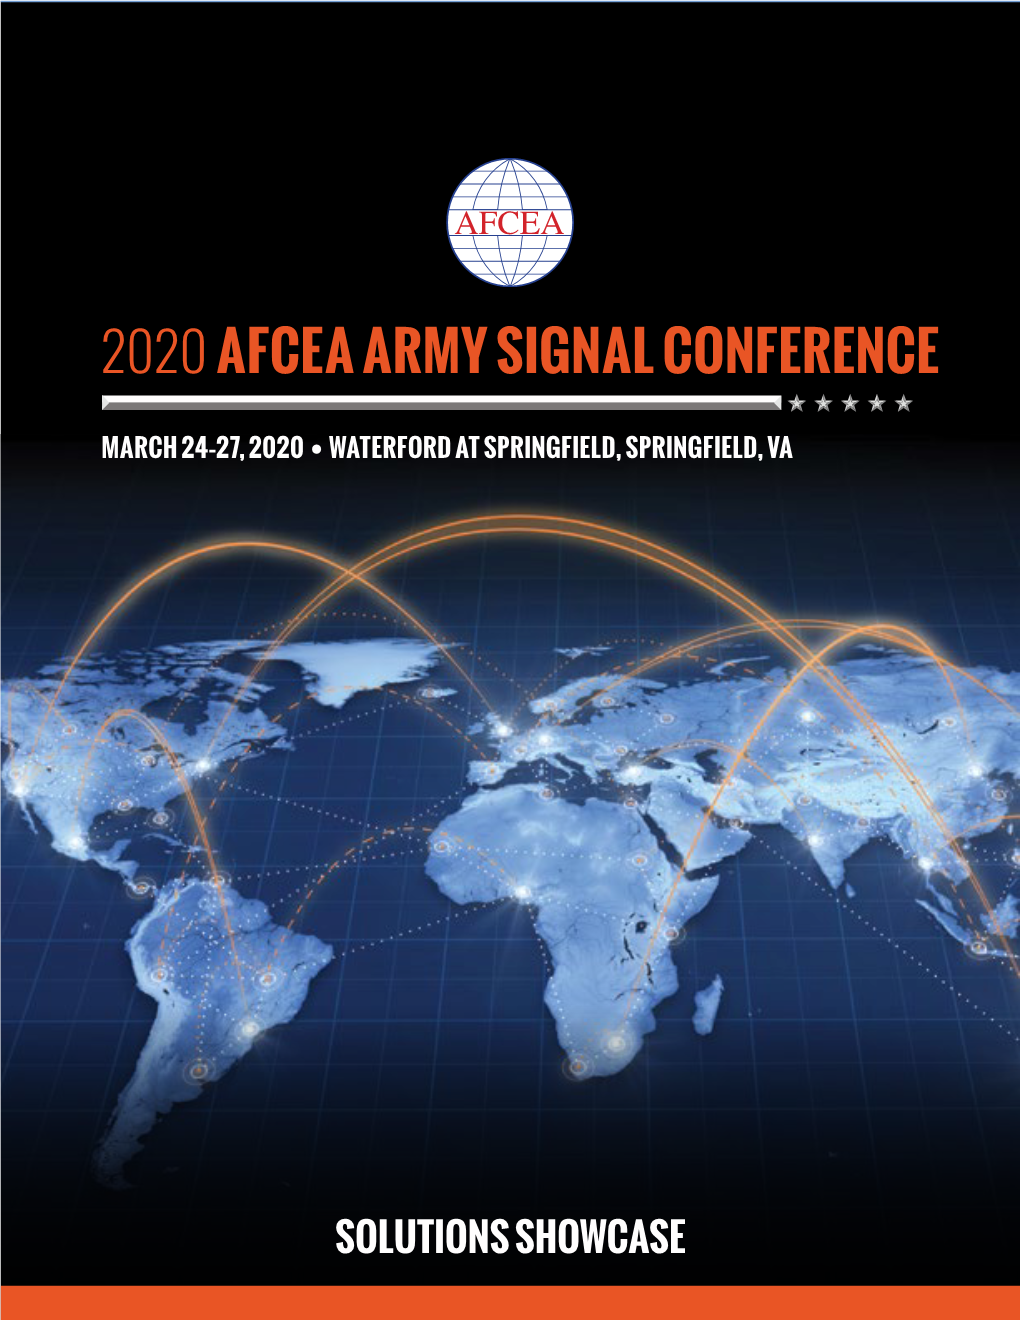 AFCEA Army Signal Conference Solution Reviews Showcase